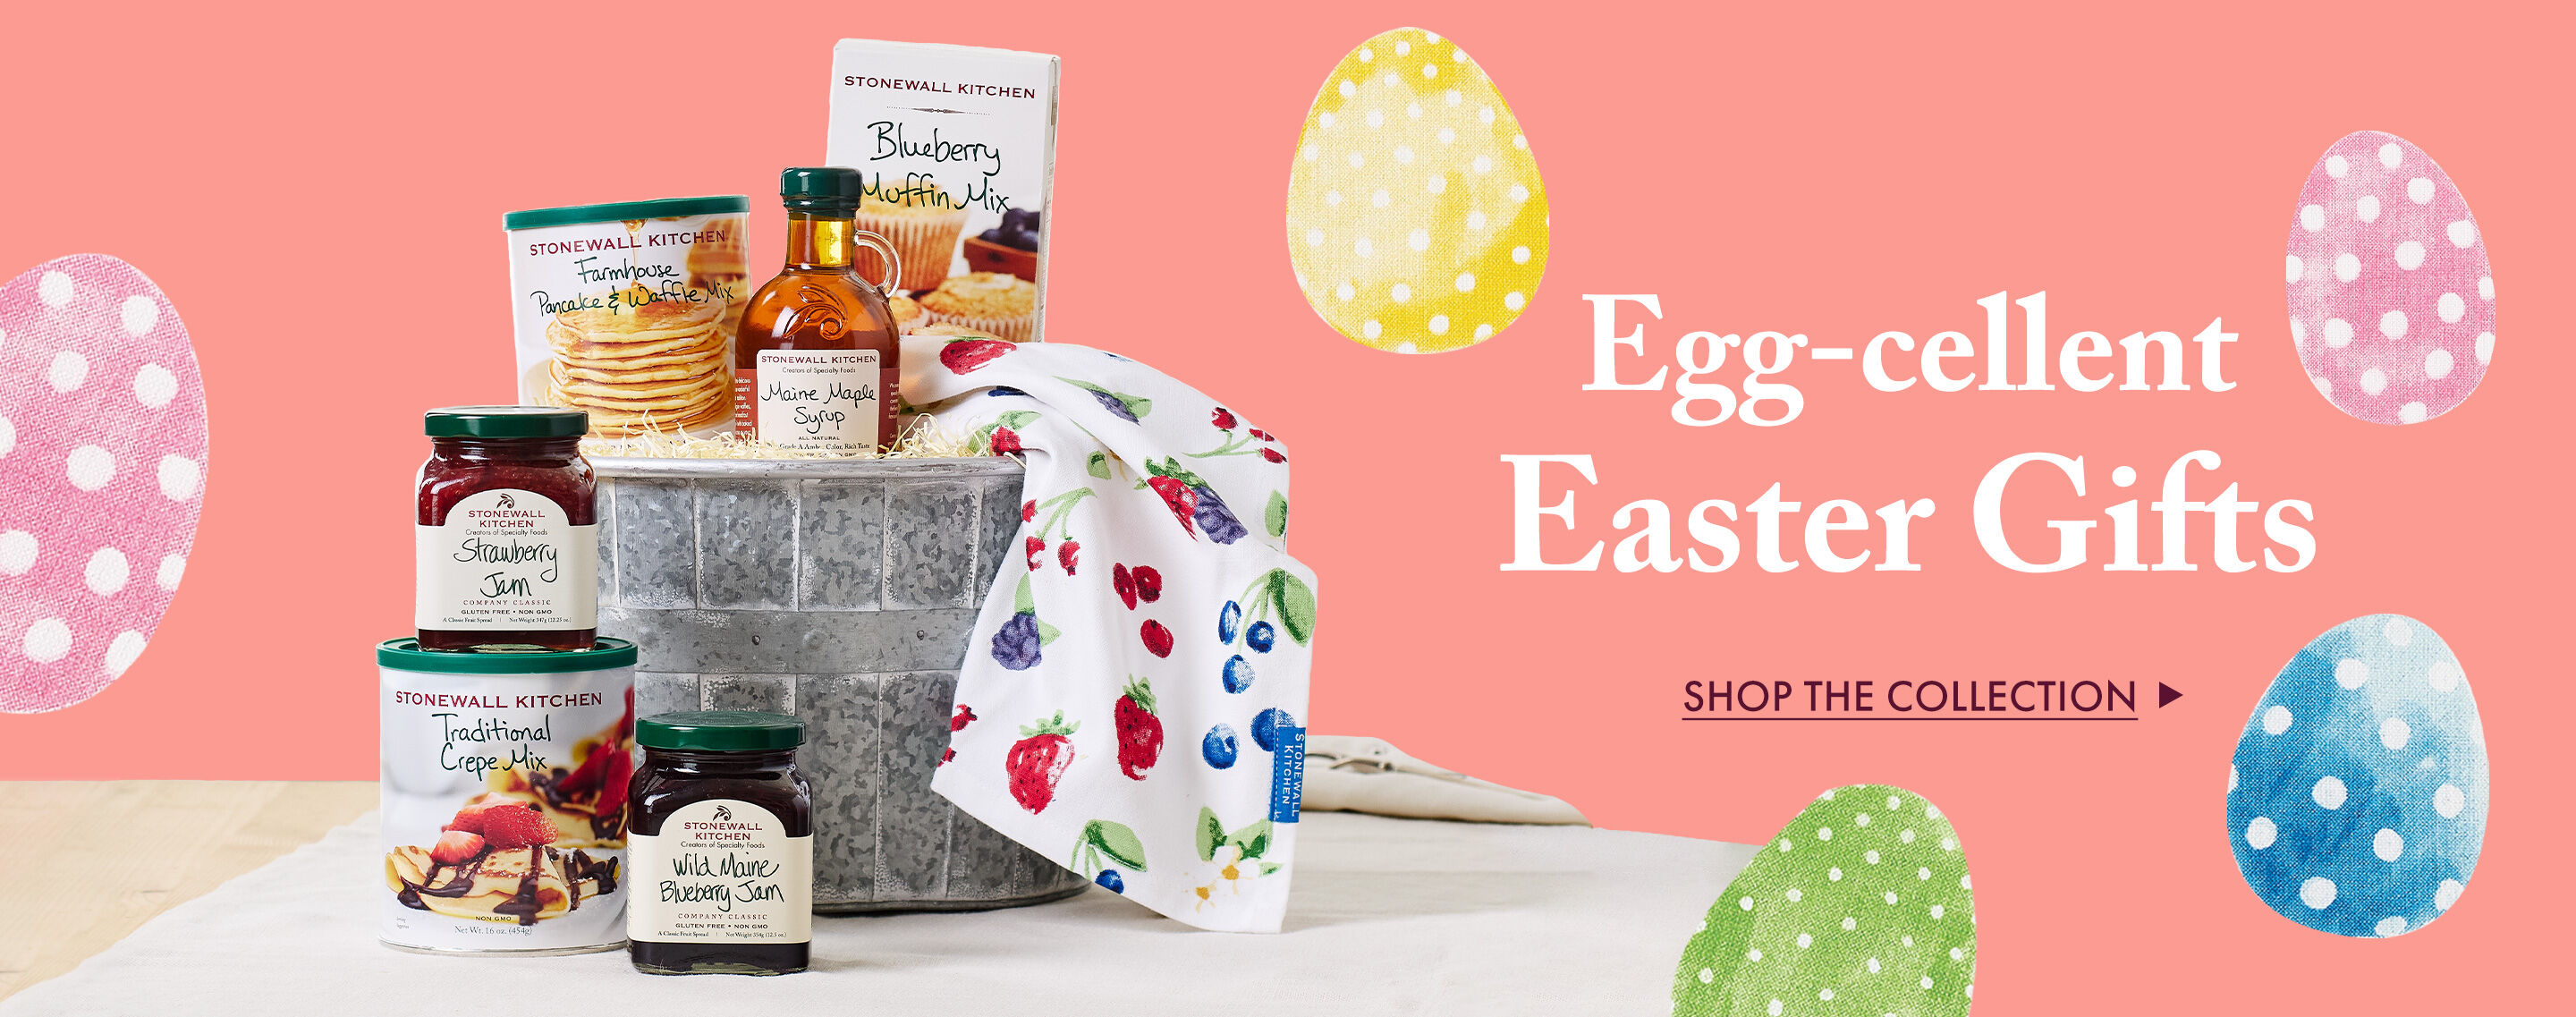 Egg-cellent Easter Gifts - Shop the Collection